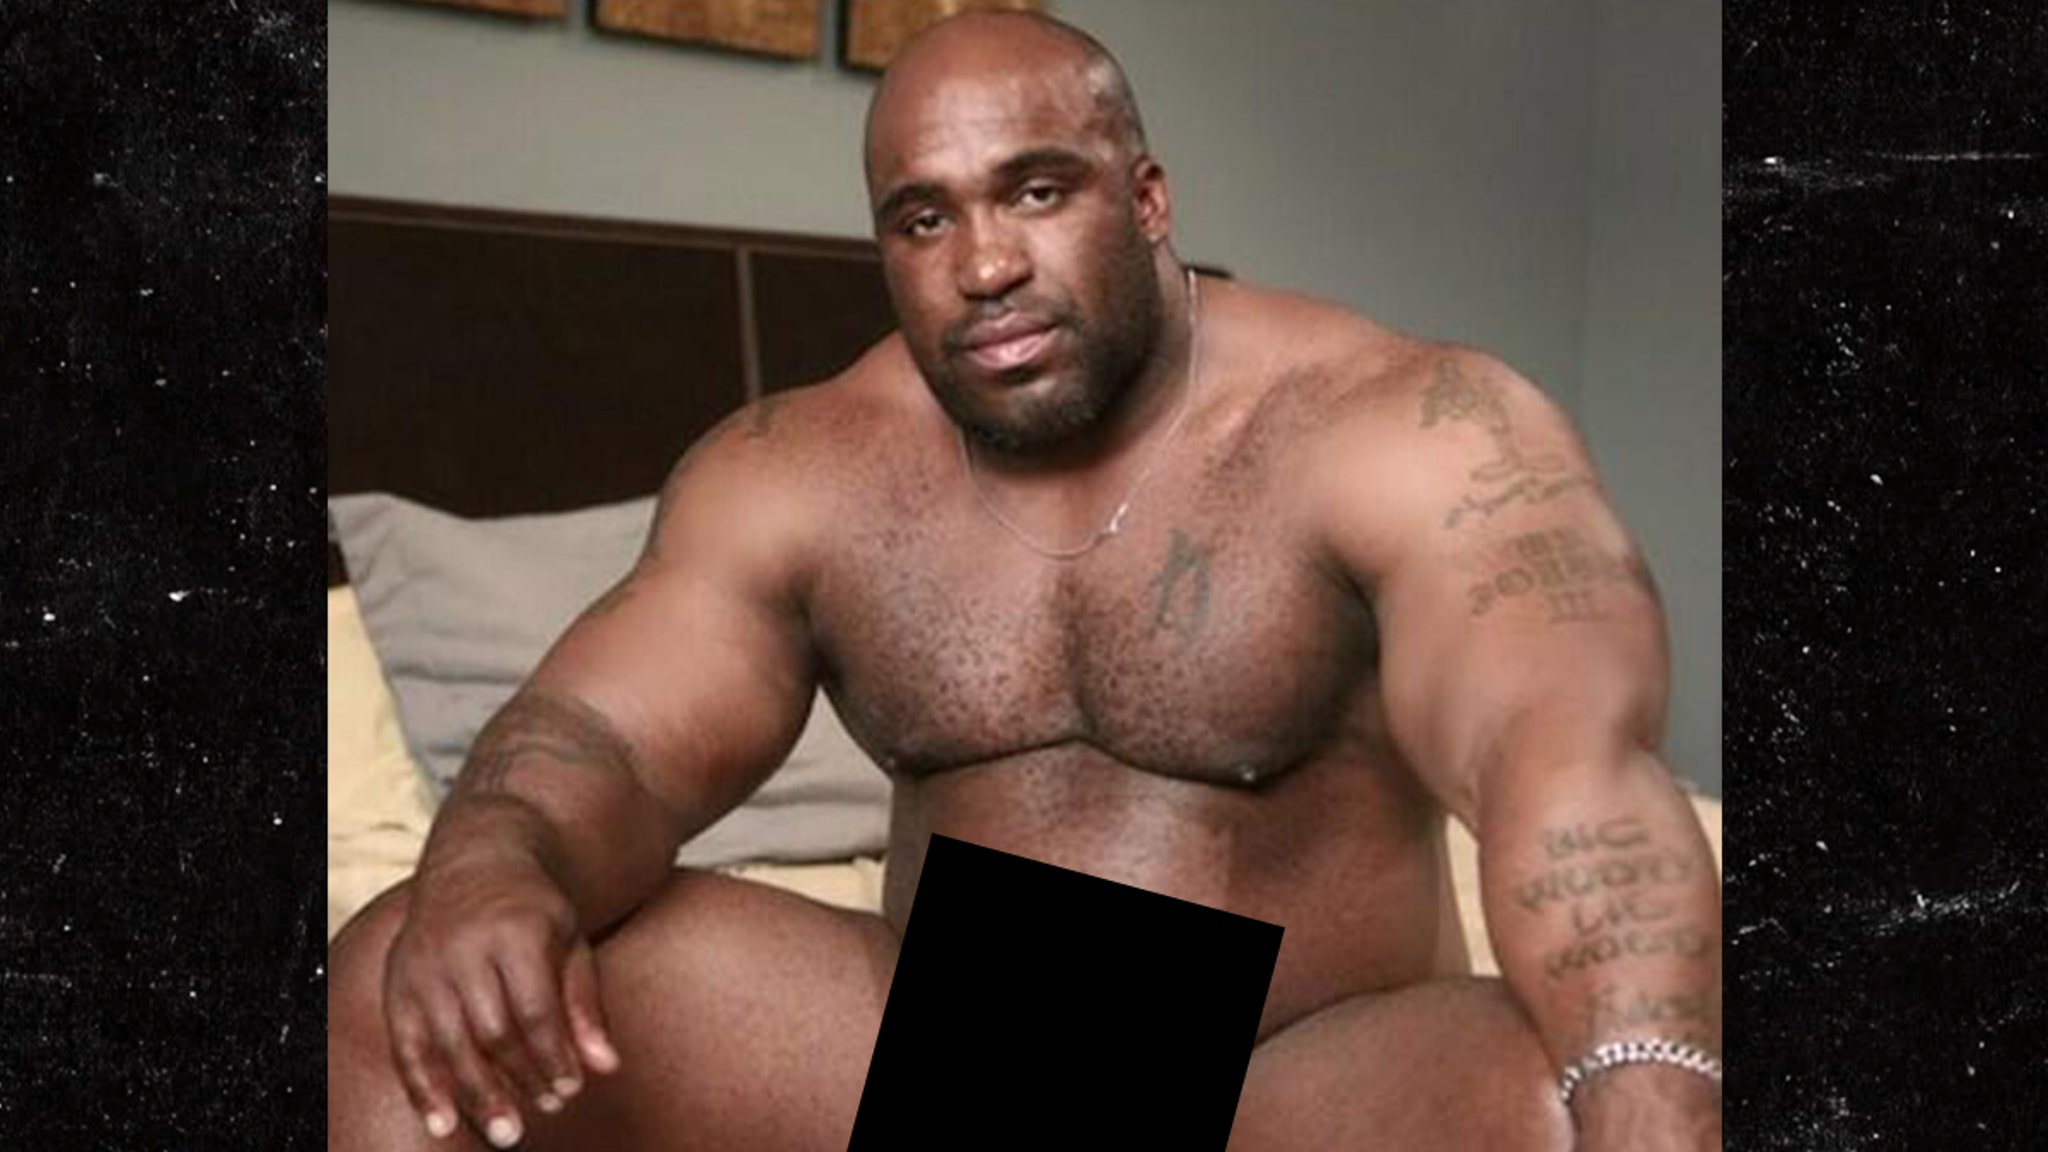 Big black dude with dick out meme